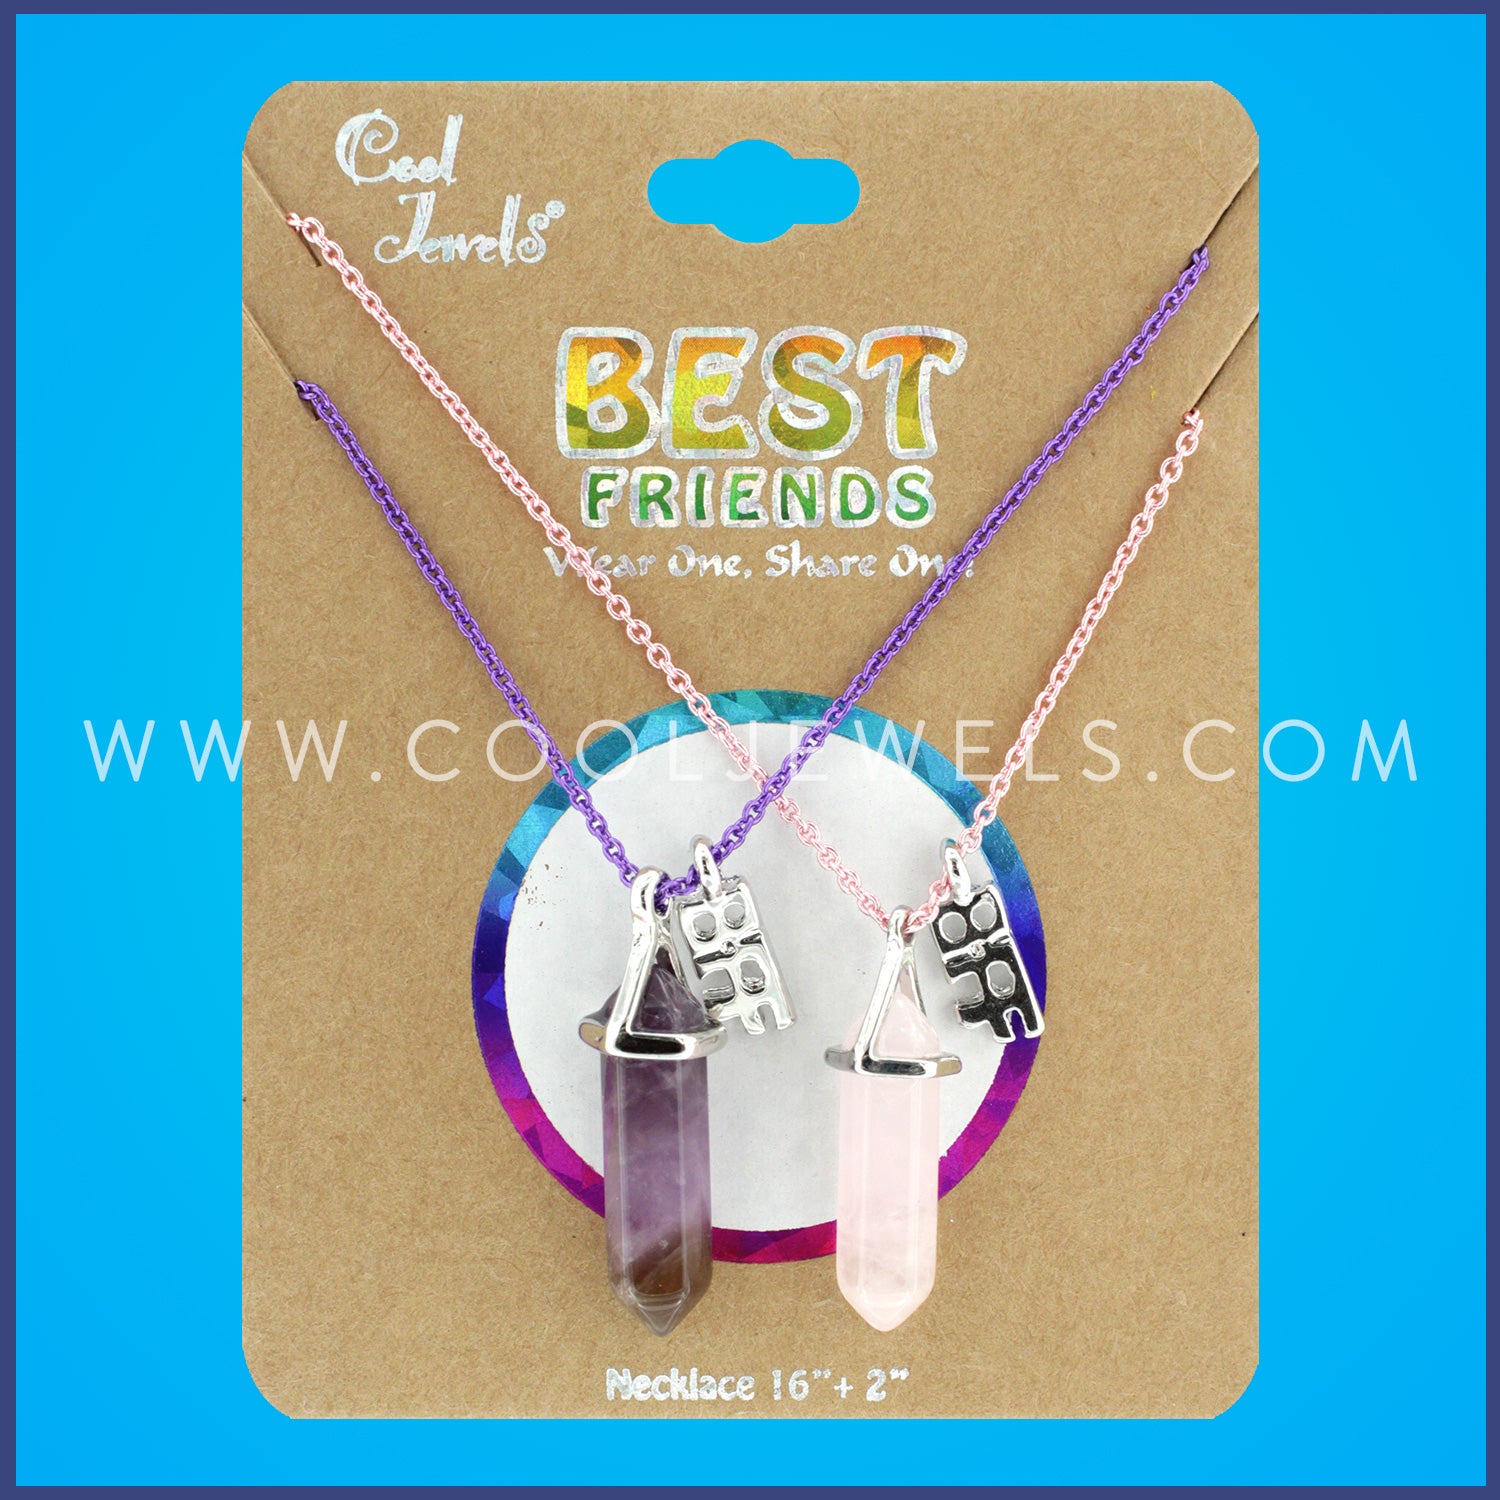 (SET OF 2 ) LINK CHAIN NECKLACE WITH AMETHYST & ROSE QUARTZ STONE "BFF" - CARDED